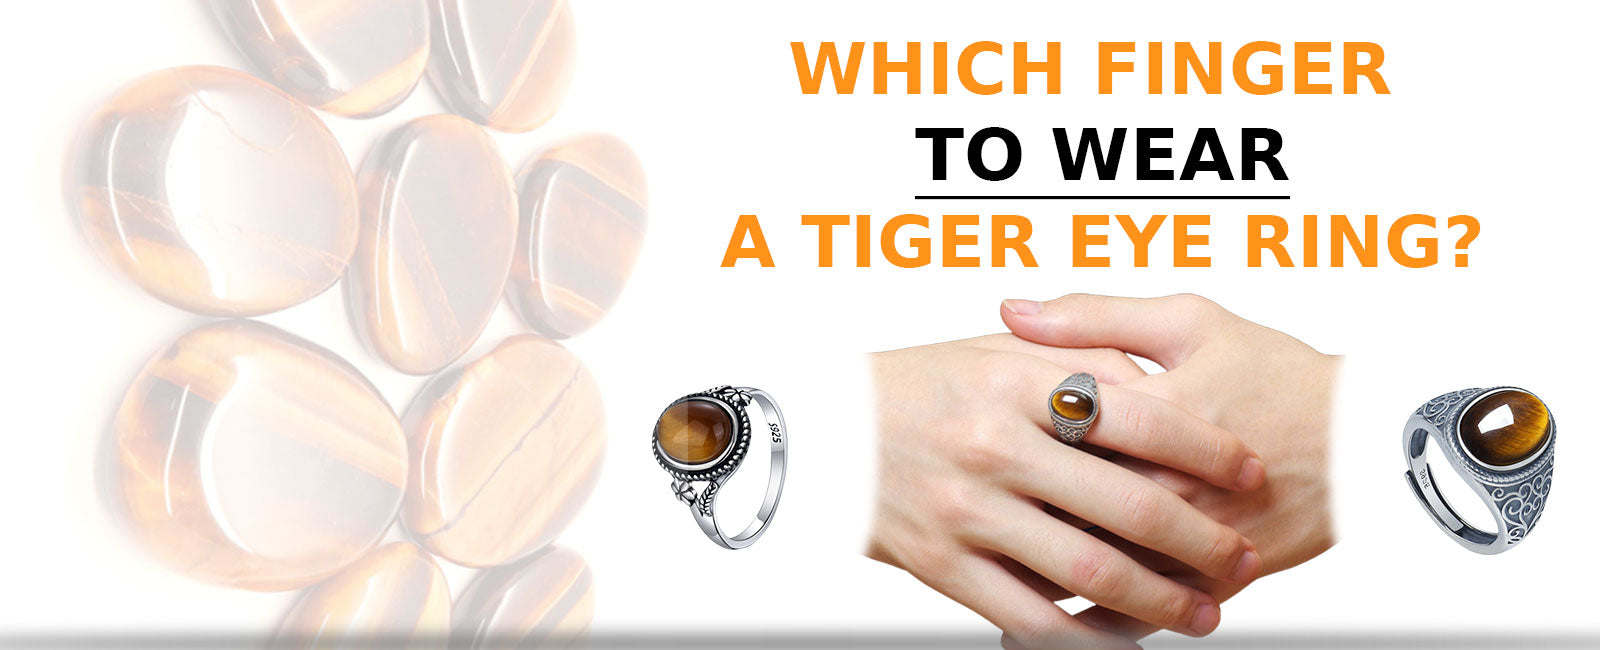 Which Finger to Wear Tiger Eye Ring?